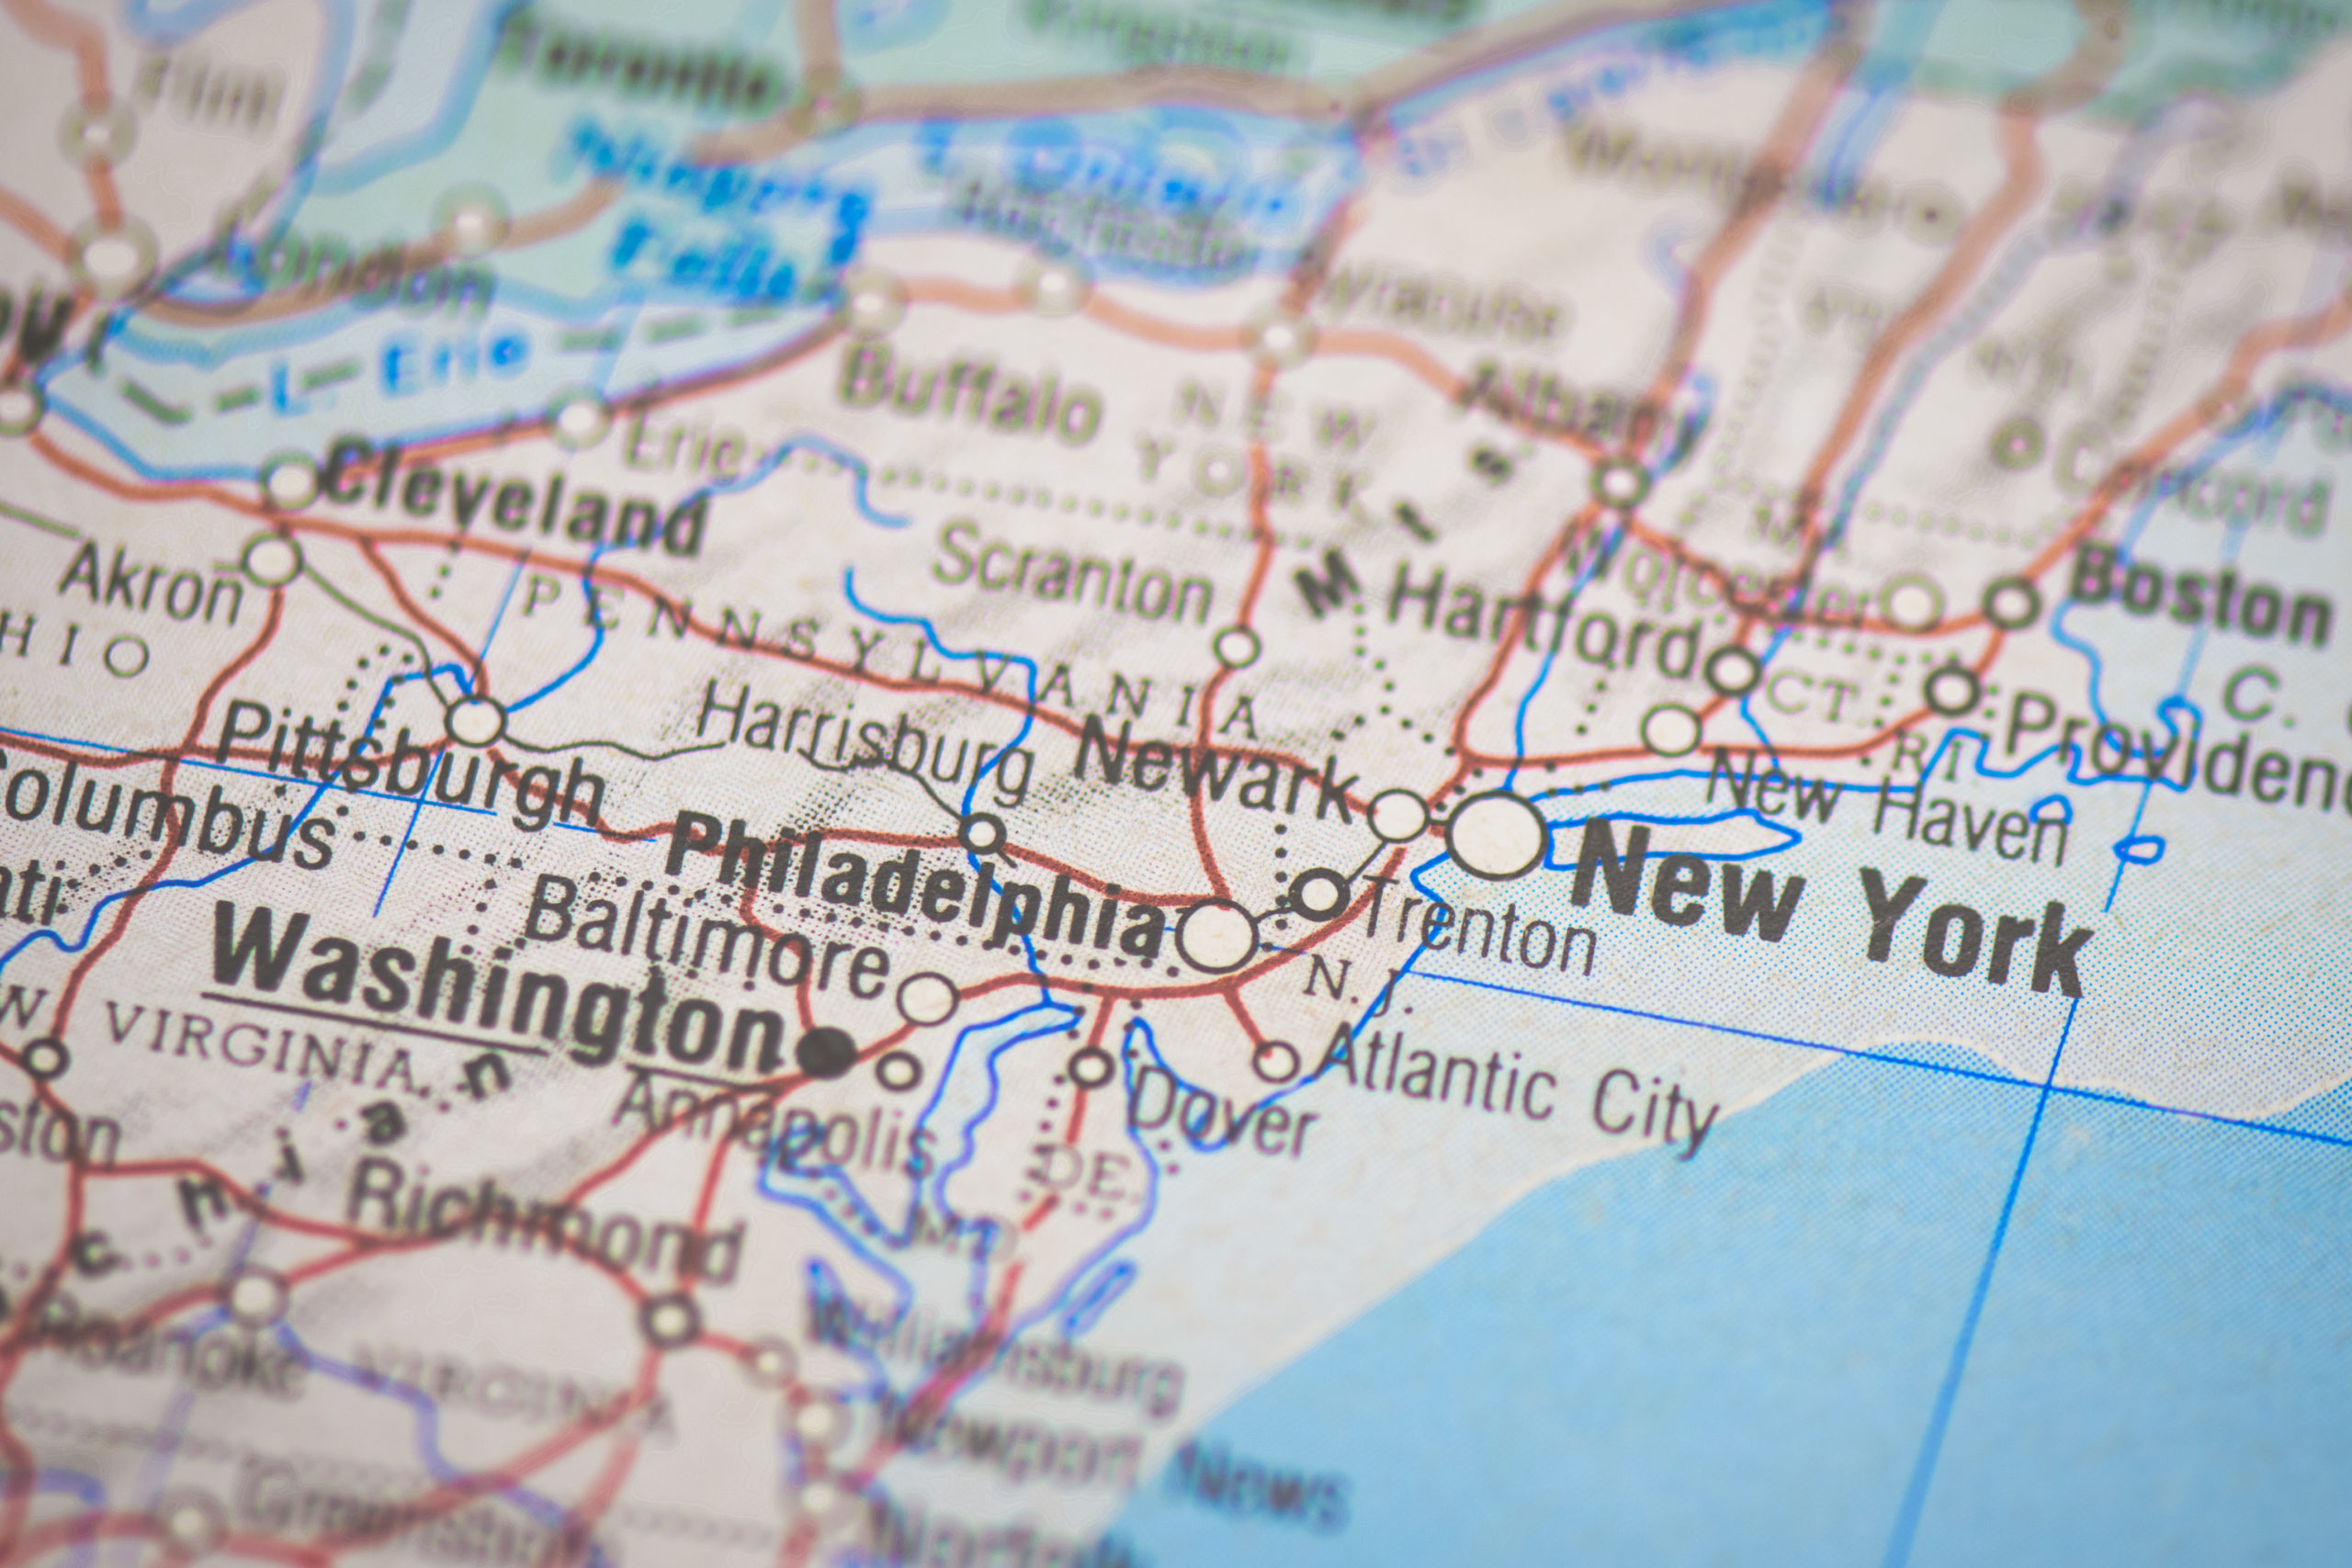 Detail of New York United States on the map